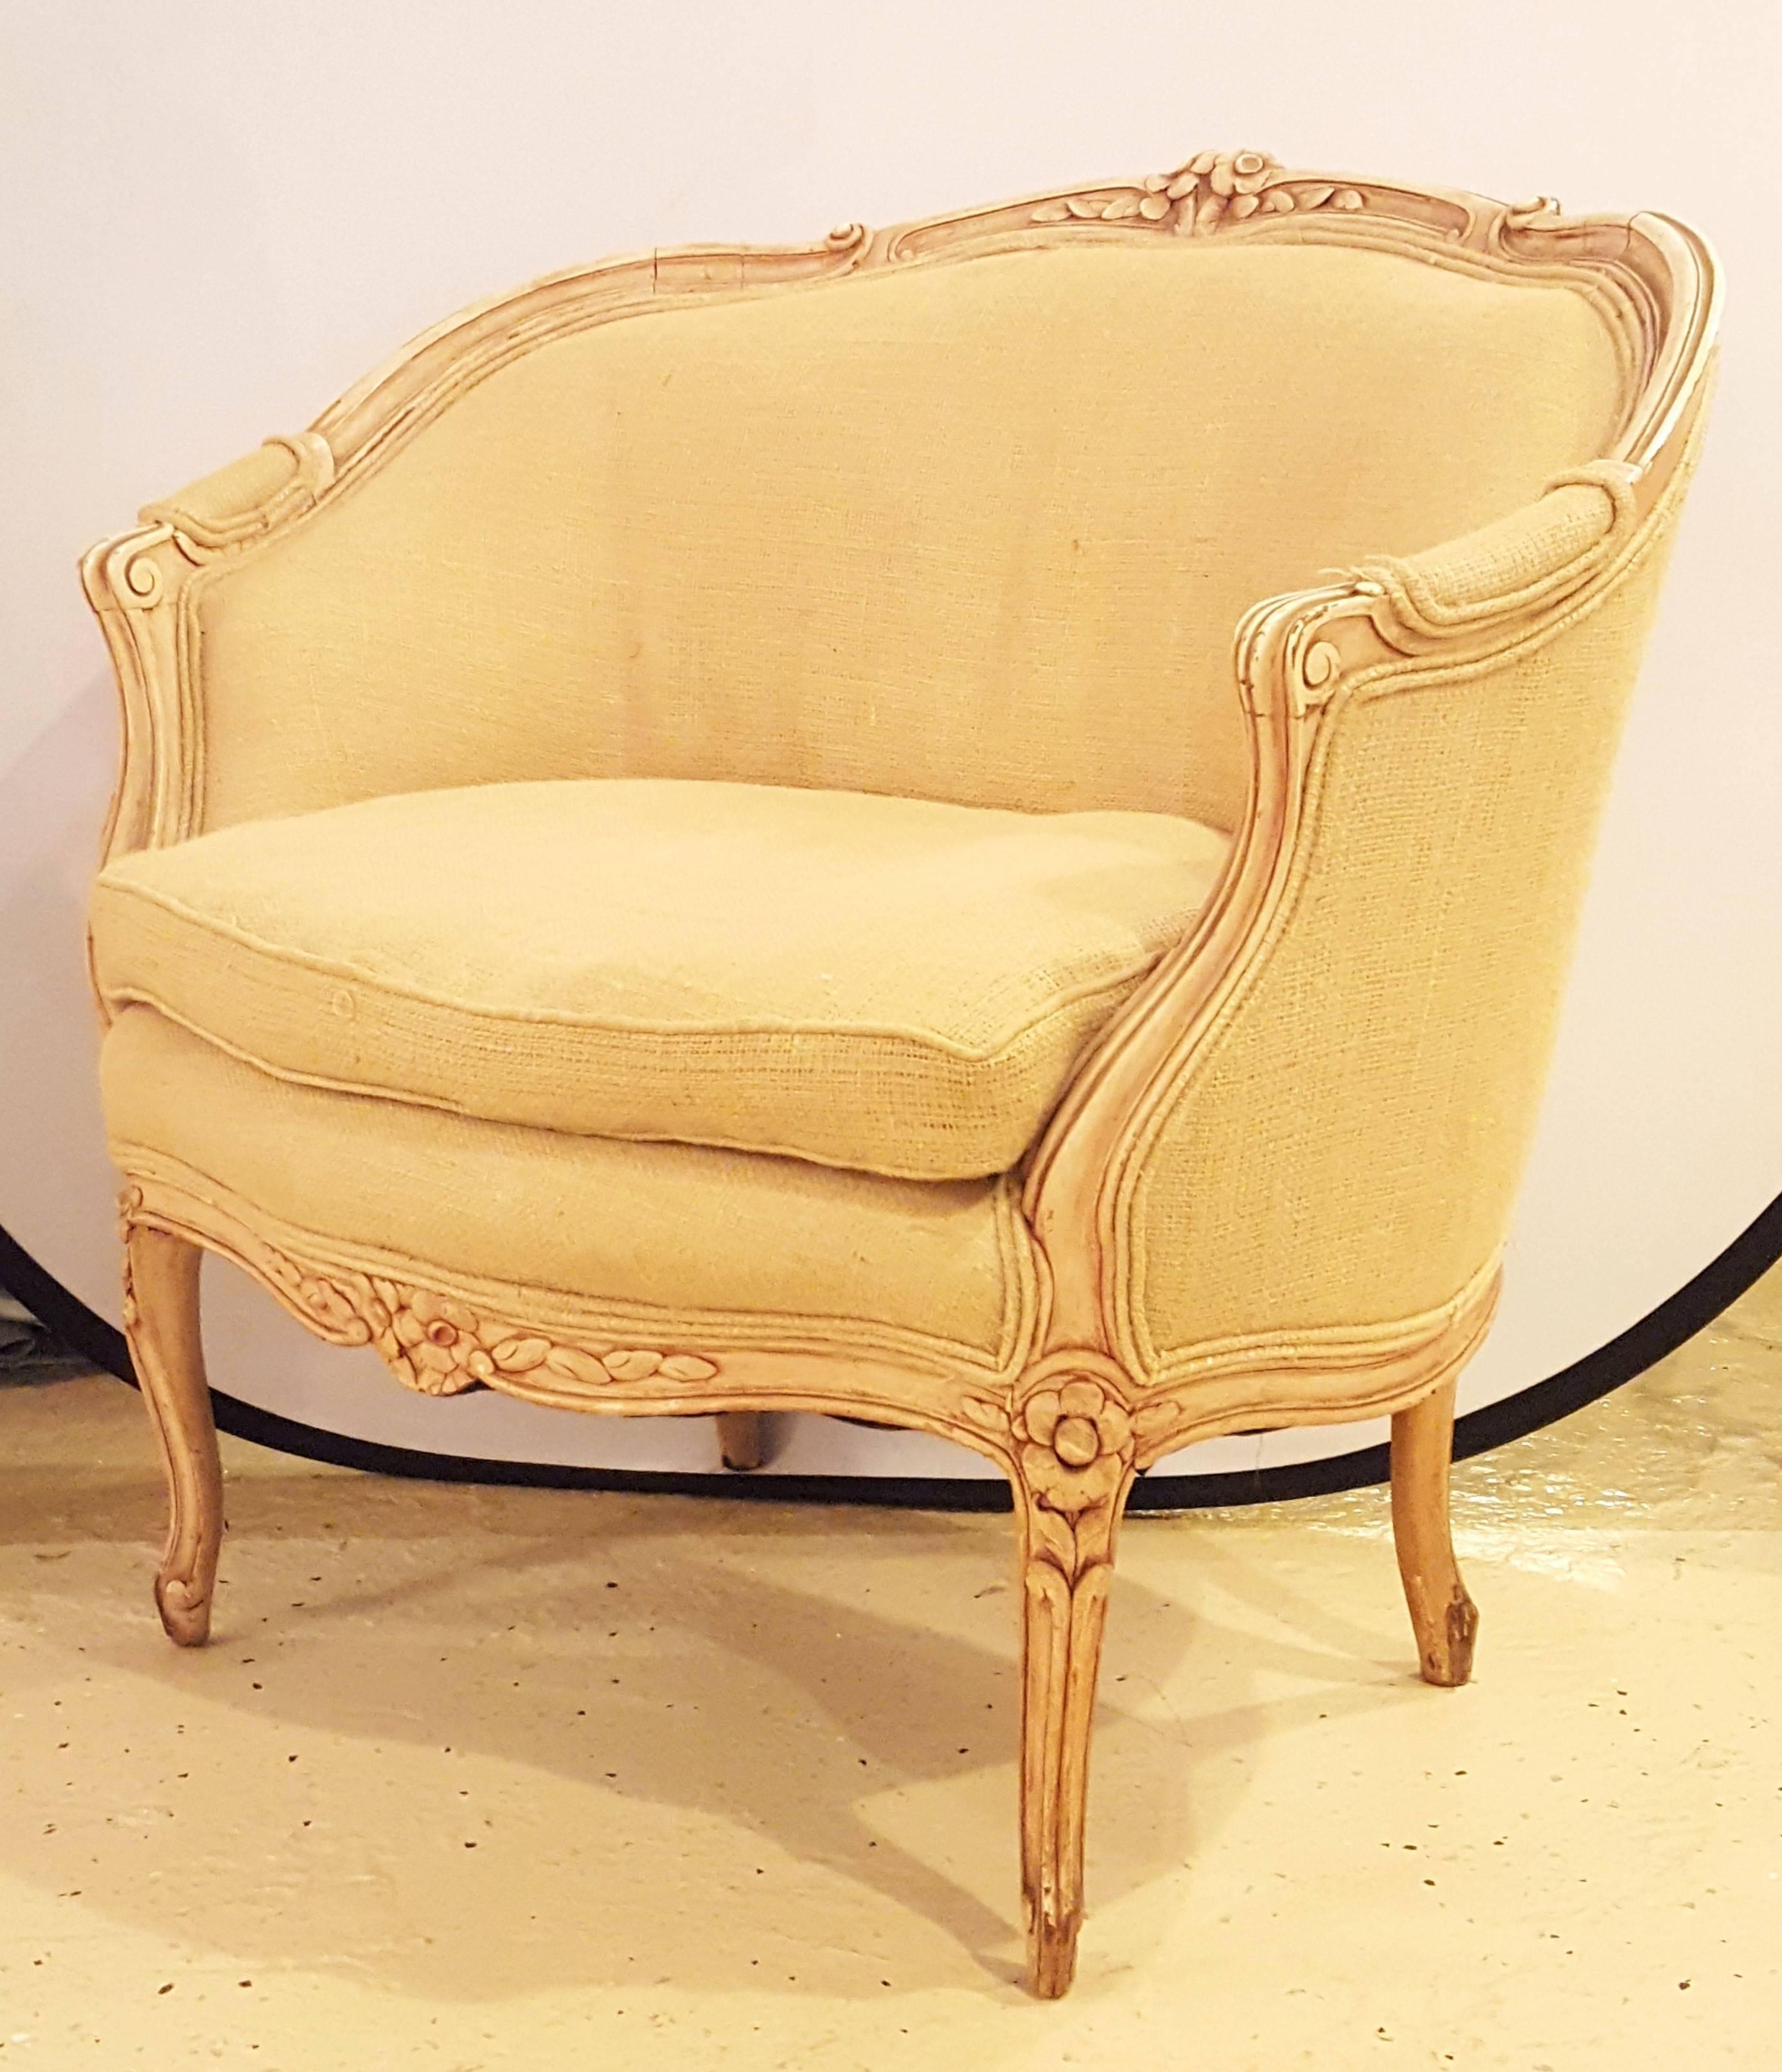 20th Century Louis XV Style Distressed Barrel Back Armchair Carved Frame With Rosettes